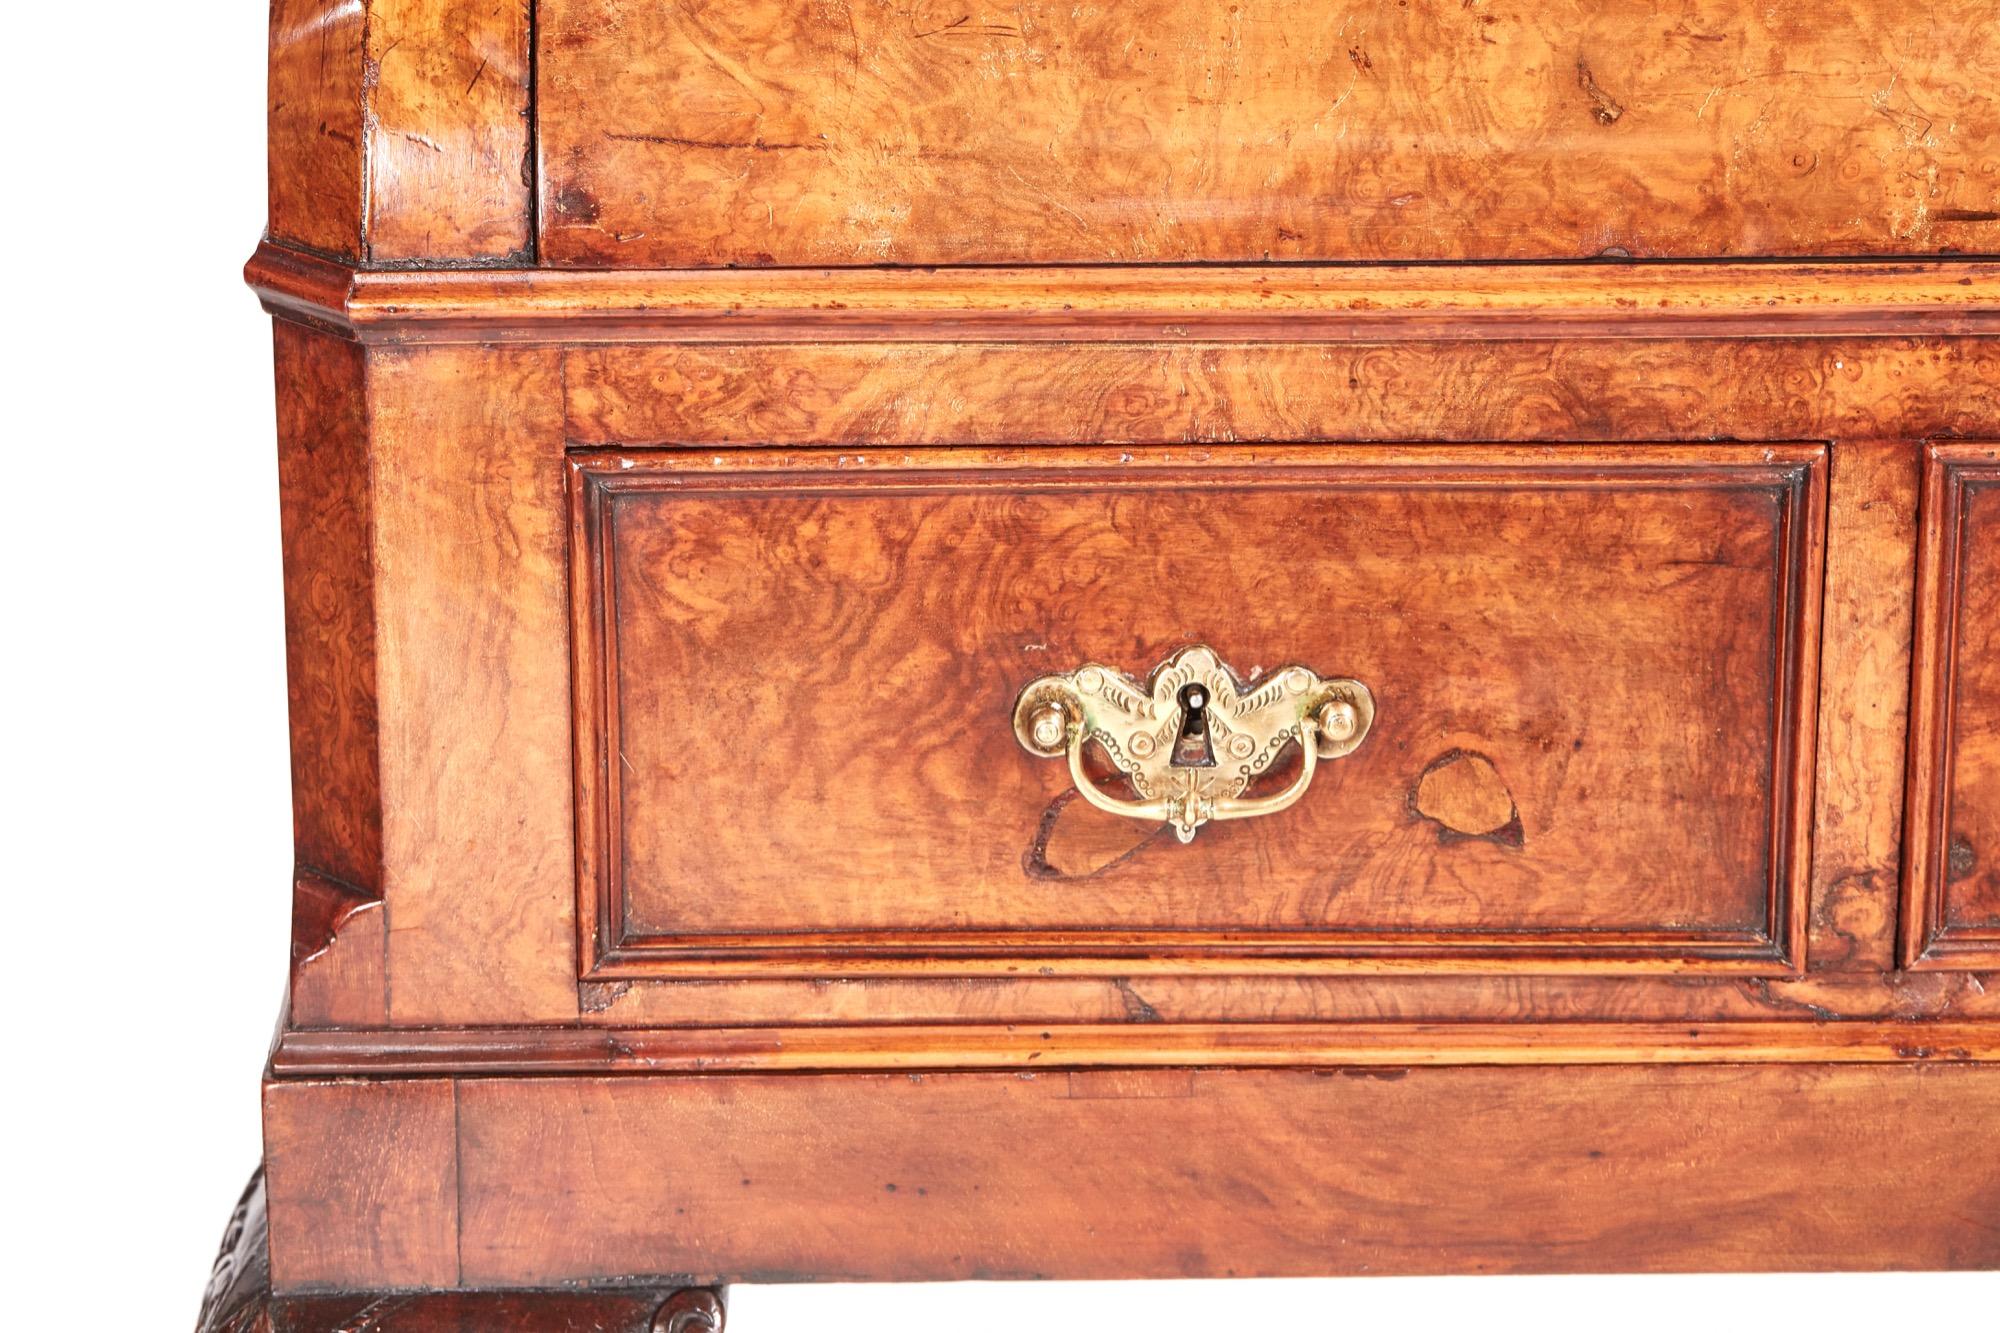 Exceptional Quality Antique 19th Century Victorian Burr Walnut Bureau In Excellent Condition For Sale In Suffolk, GB